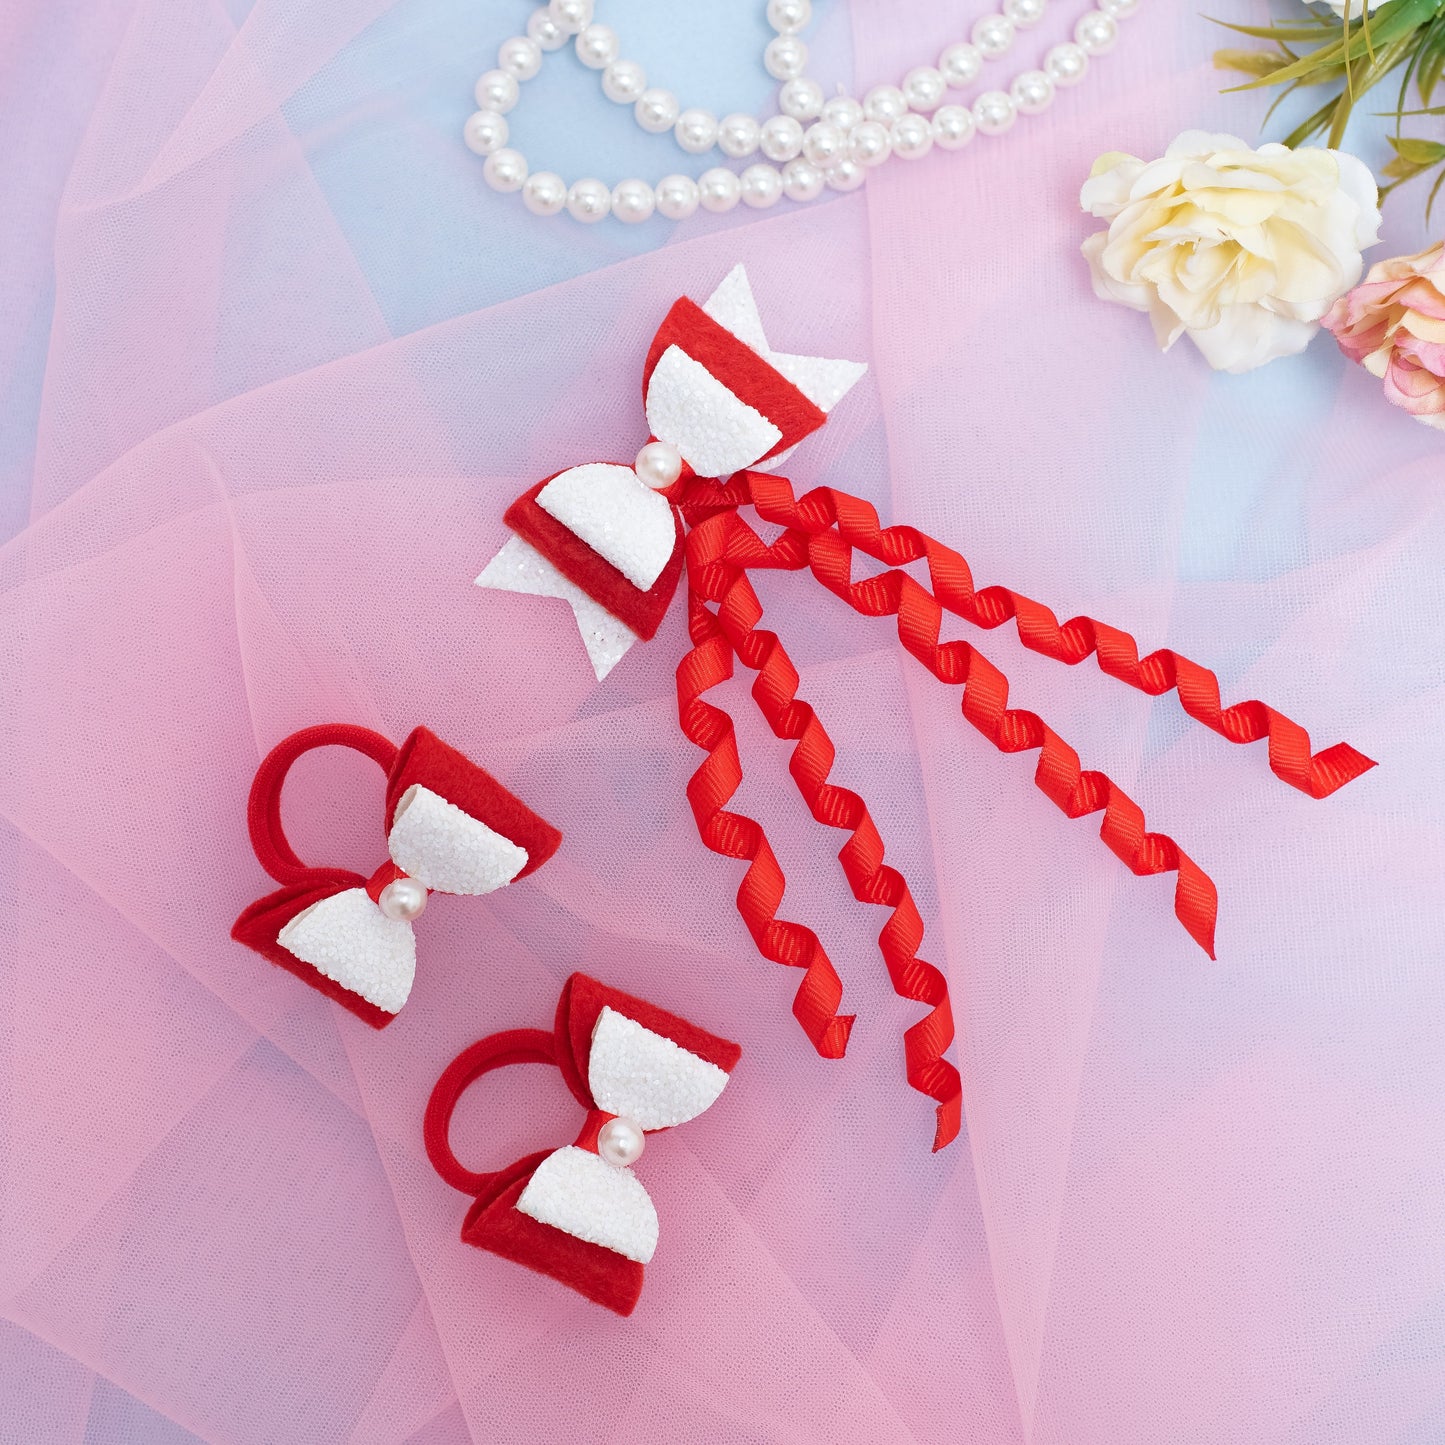 Combo: 1 Dangler Hair-pin and 2 Rubberbands with Fancy Shimmer Bow for Party -  Red, White (Set of 1 pair Rubberbands , 1 Dangler on Alligator clip = 3 quantity)